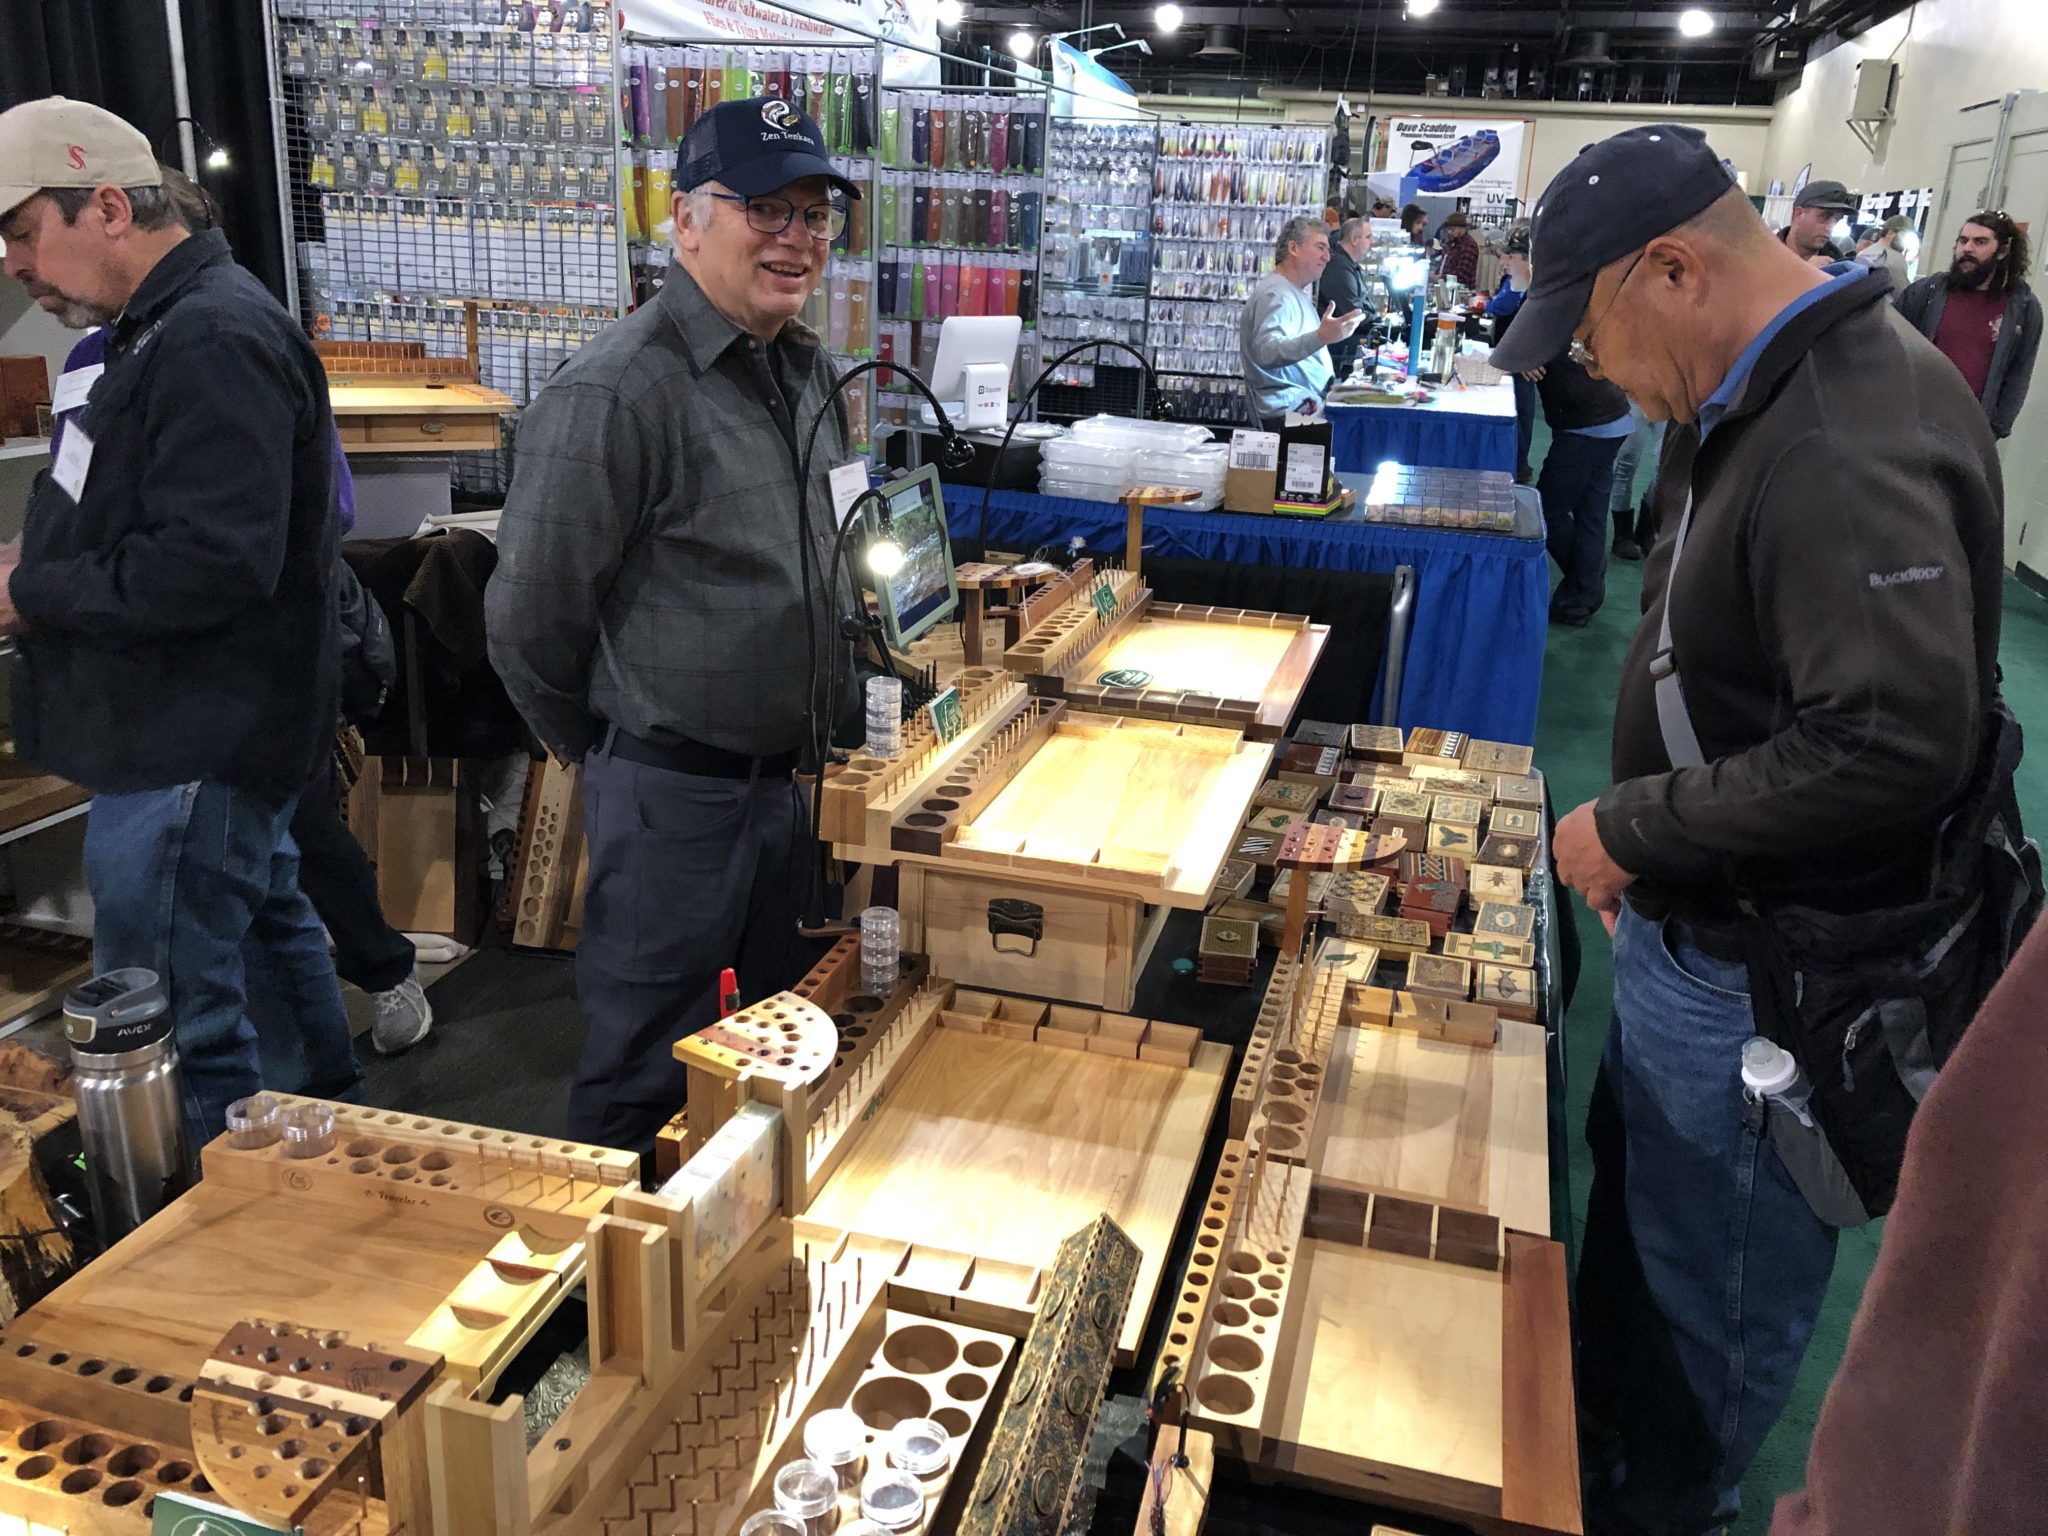 Wooden Tenkara Boxes at the Fly Fishing Show